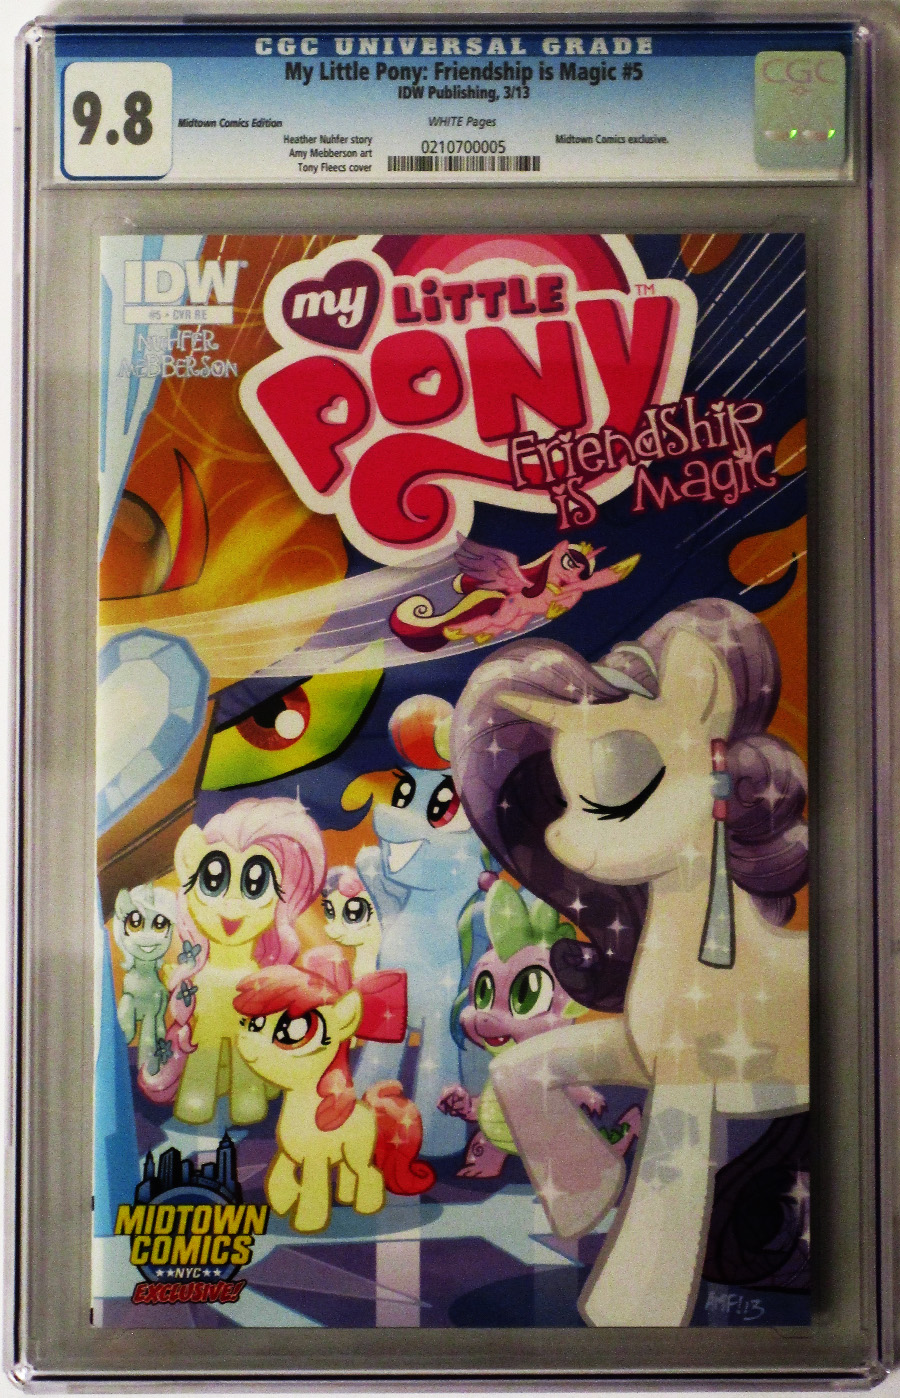 My Little Pony Friendship Is Magic #5 Midtown Exclusive Tony Fleecs Crystal Ponies Part 2 Of 2 Variant Cover CGC 9.8